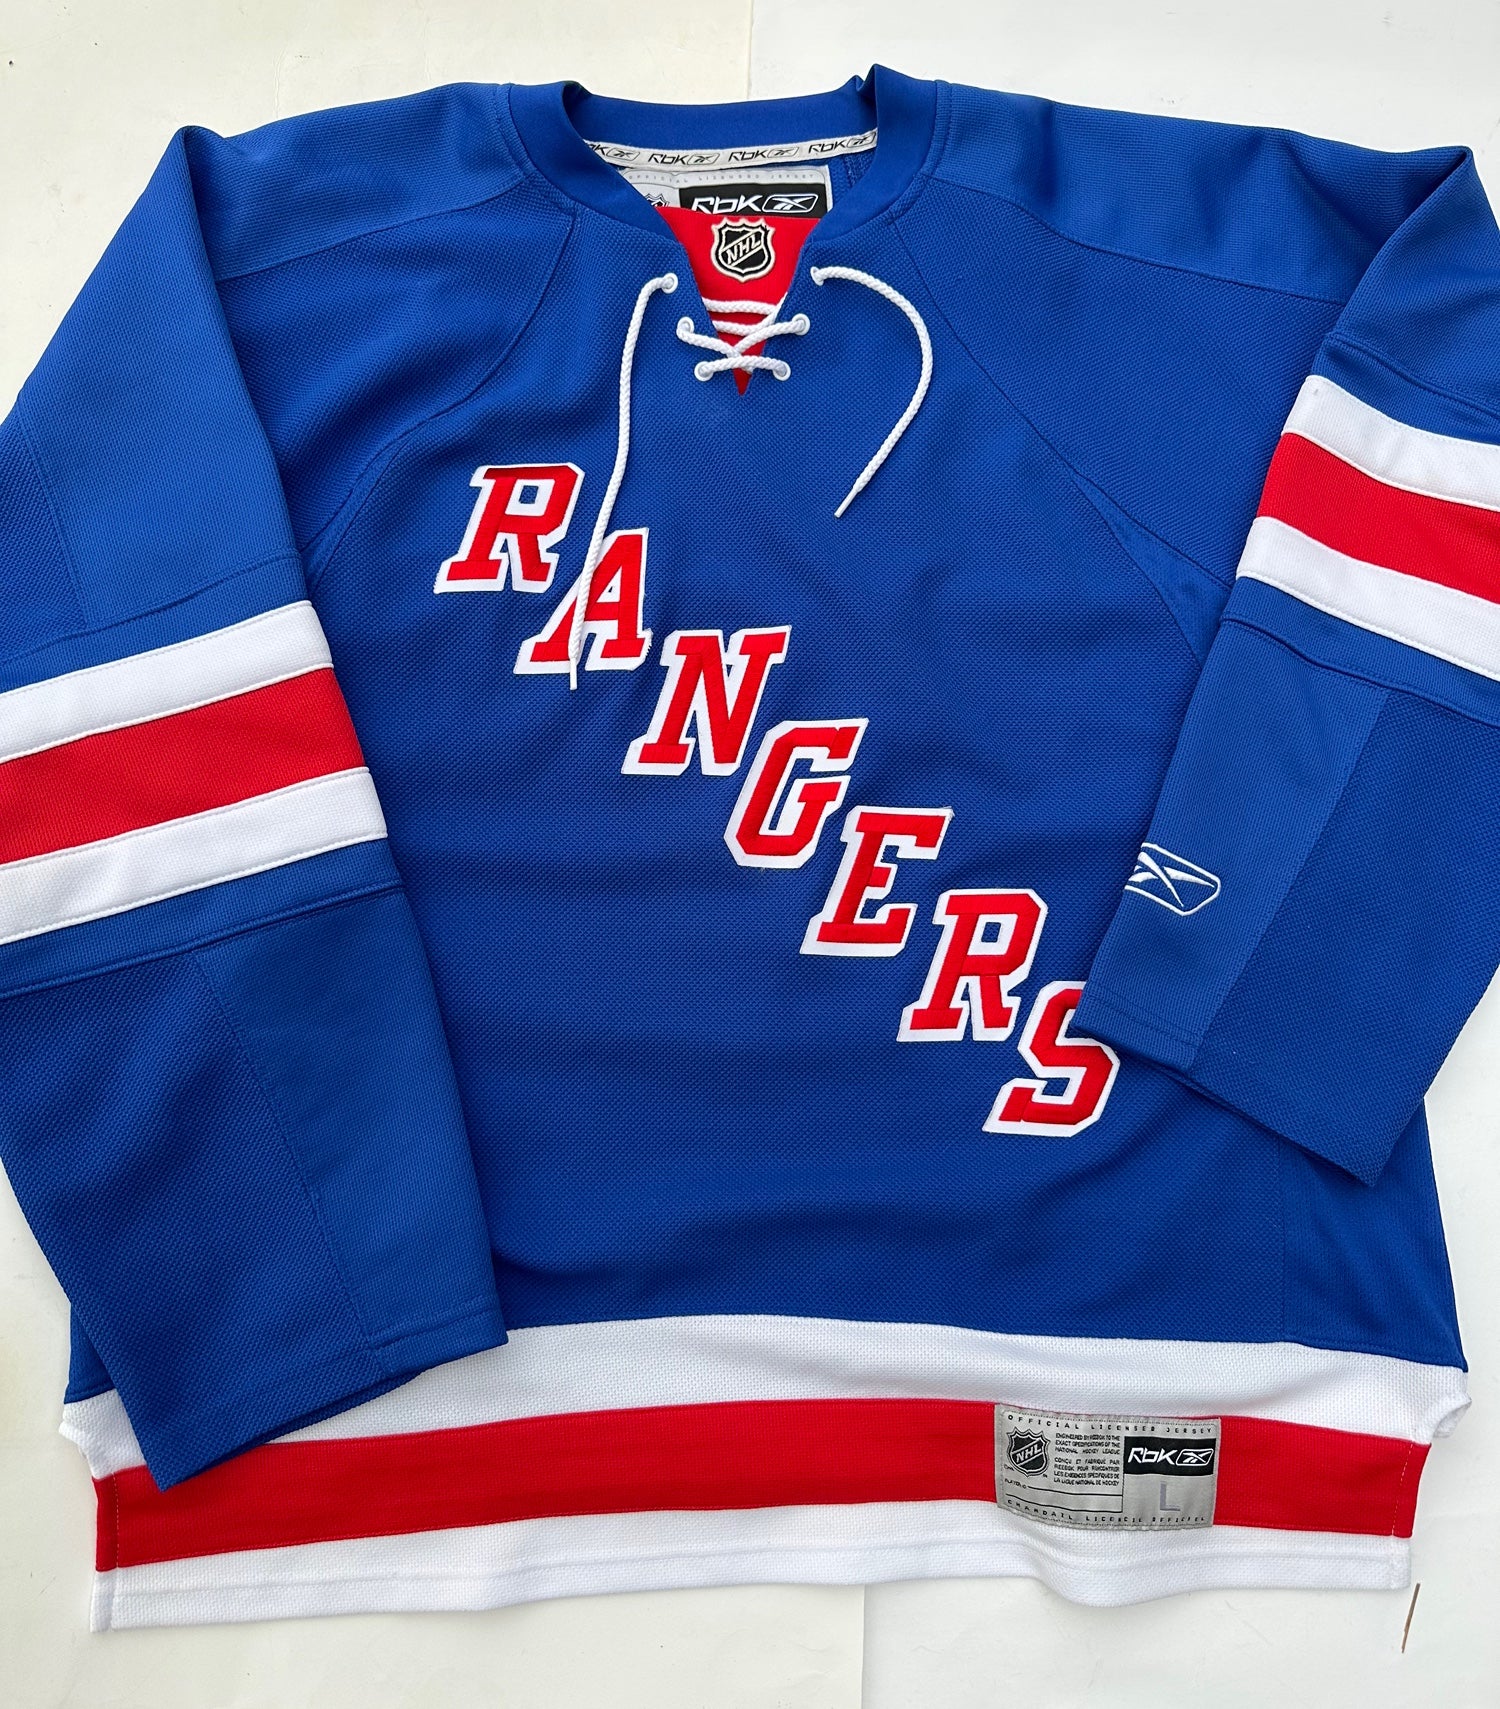 New York Rangers Fanatics Authentic Team-Issued #22 White Practice Jersey -  Size 56